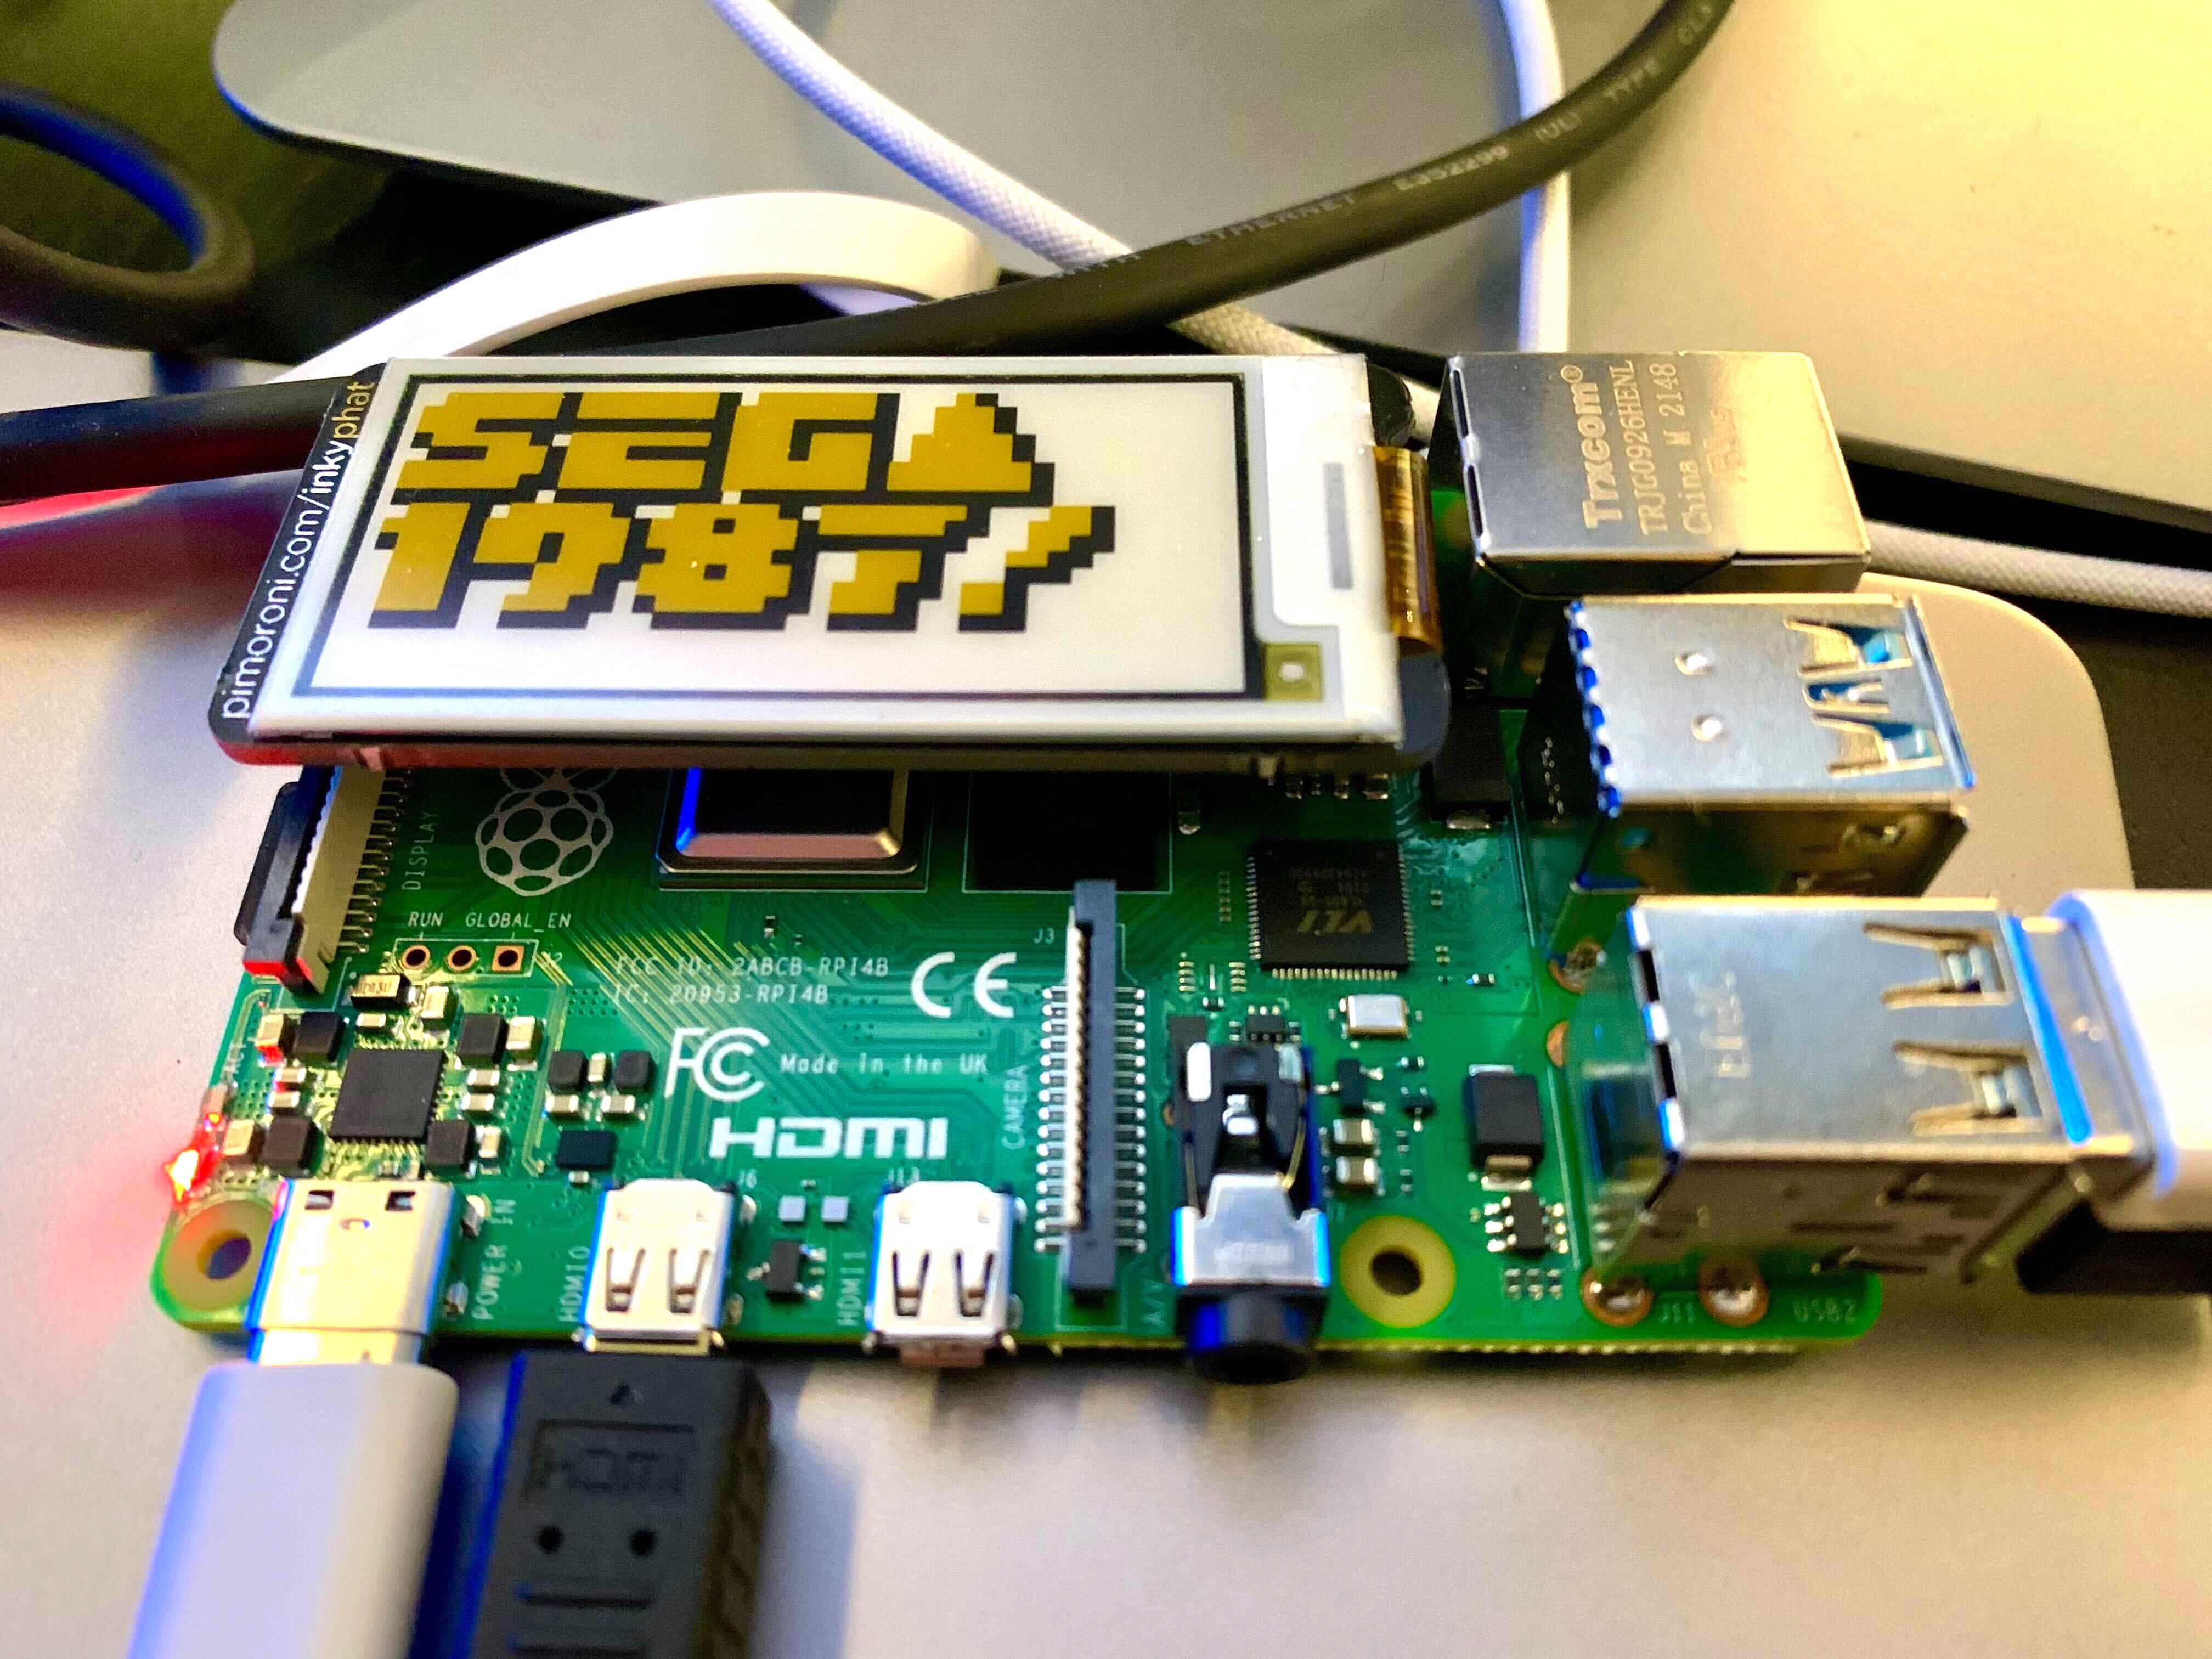 A small e-ink screen on a Raspberry Pi, displaying the words “SEGA 1987!” in a smooth and crisp retro video game typeface, in yellow with a black shadow.